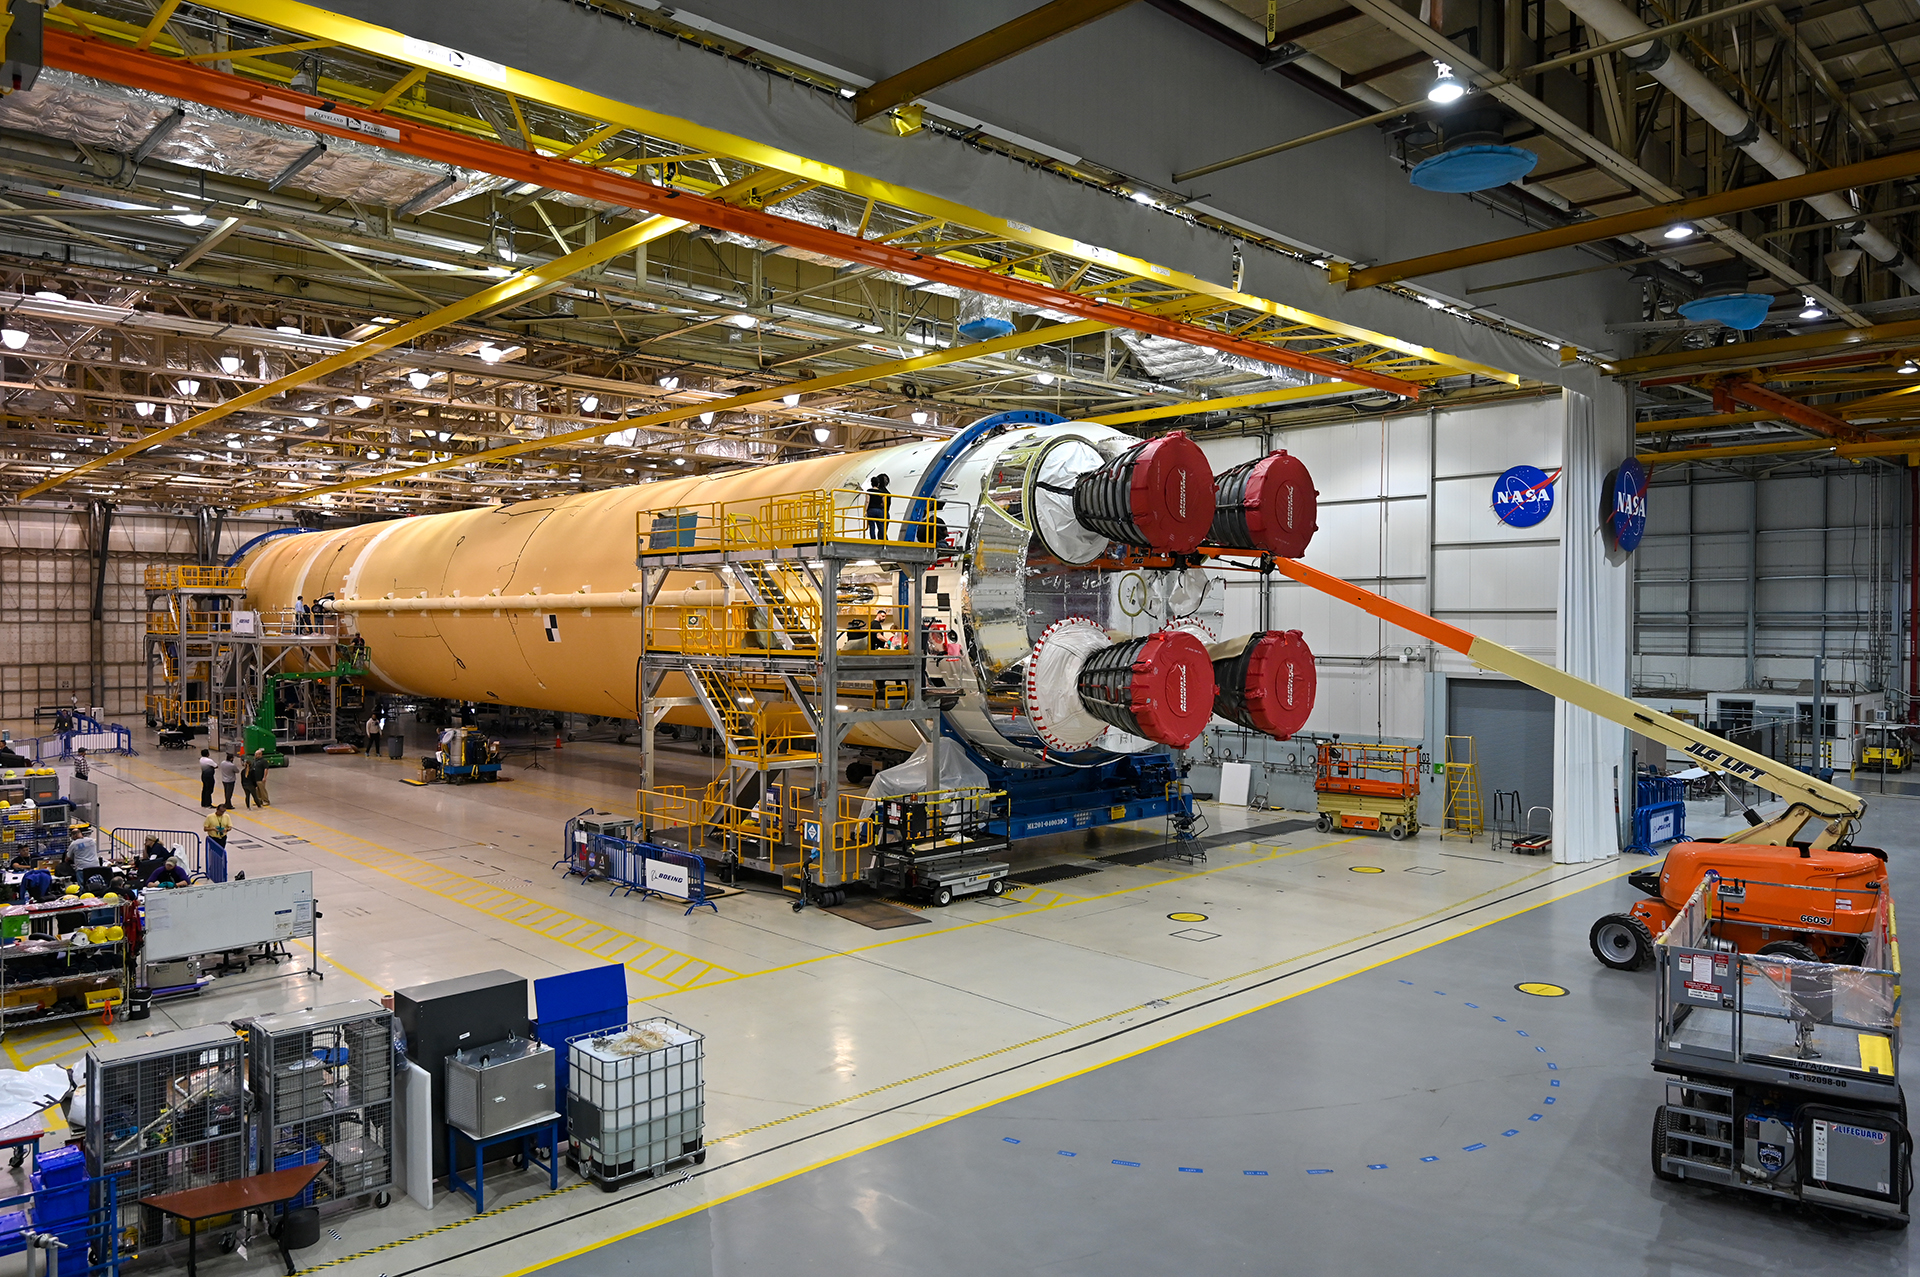 The Space Launch System (SLS) rocket core stage is prepared for shipping.